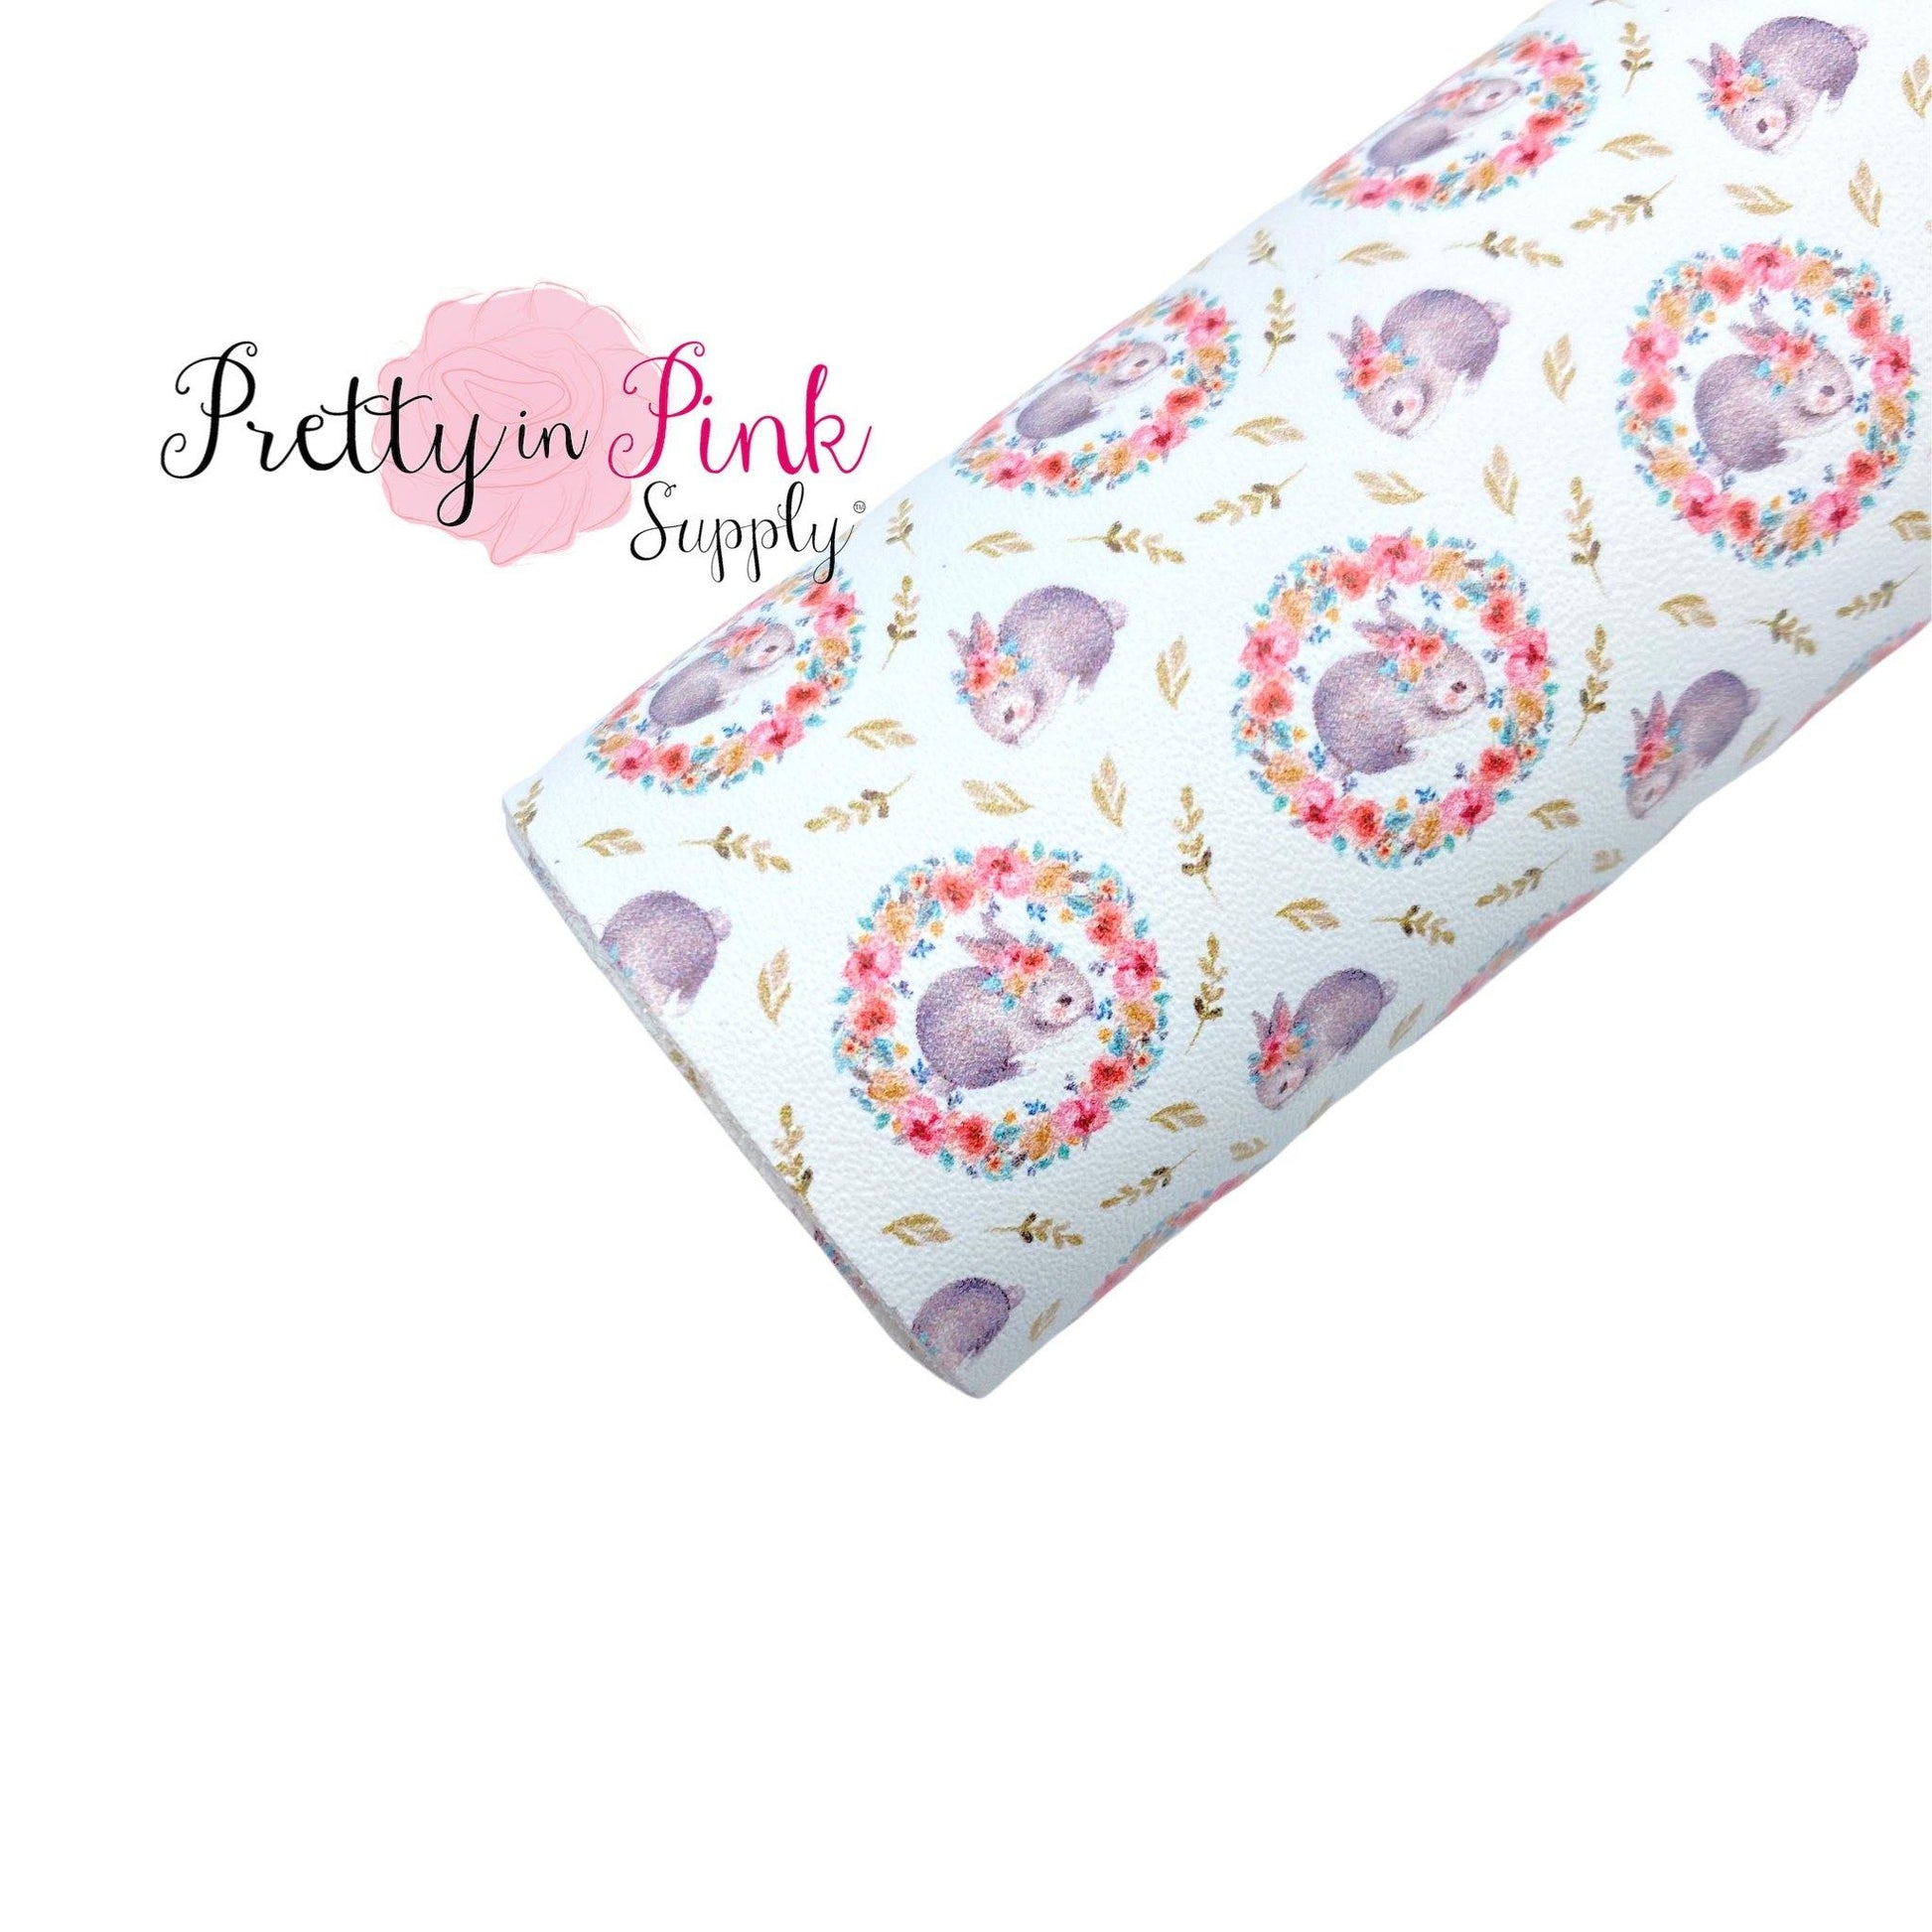 Floral Bunny Baby | Faux Leather Fabric Sheet - Pretty in Pink Supply